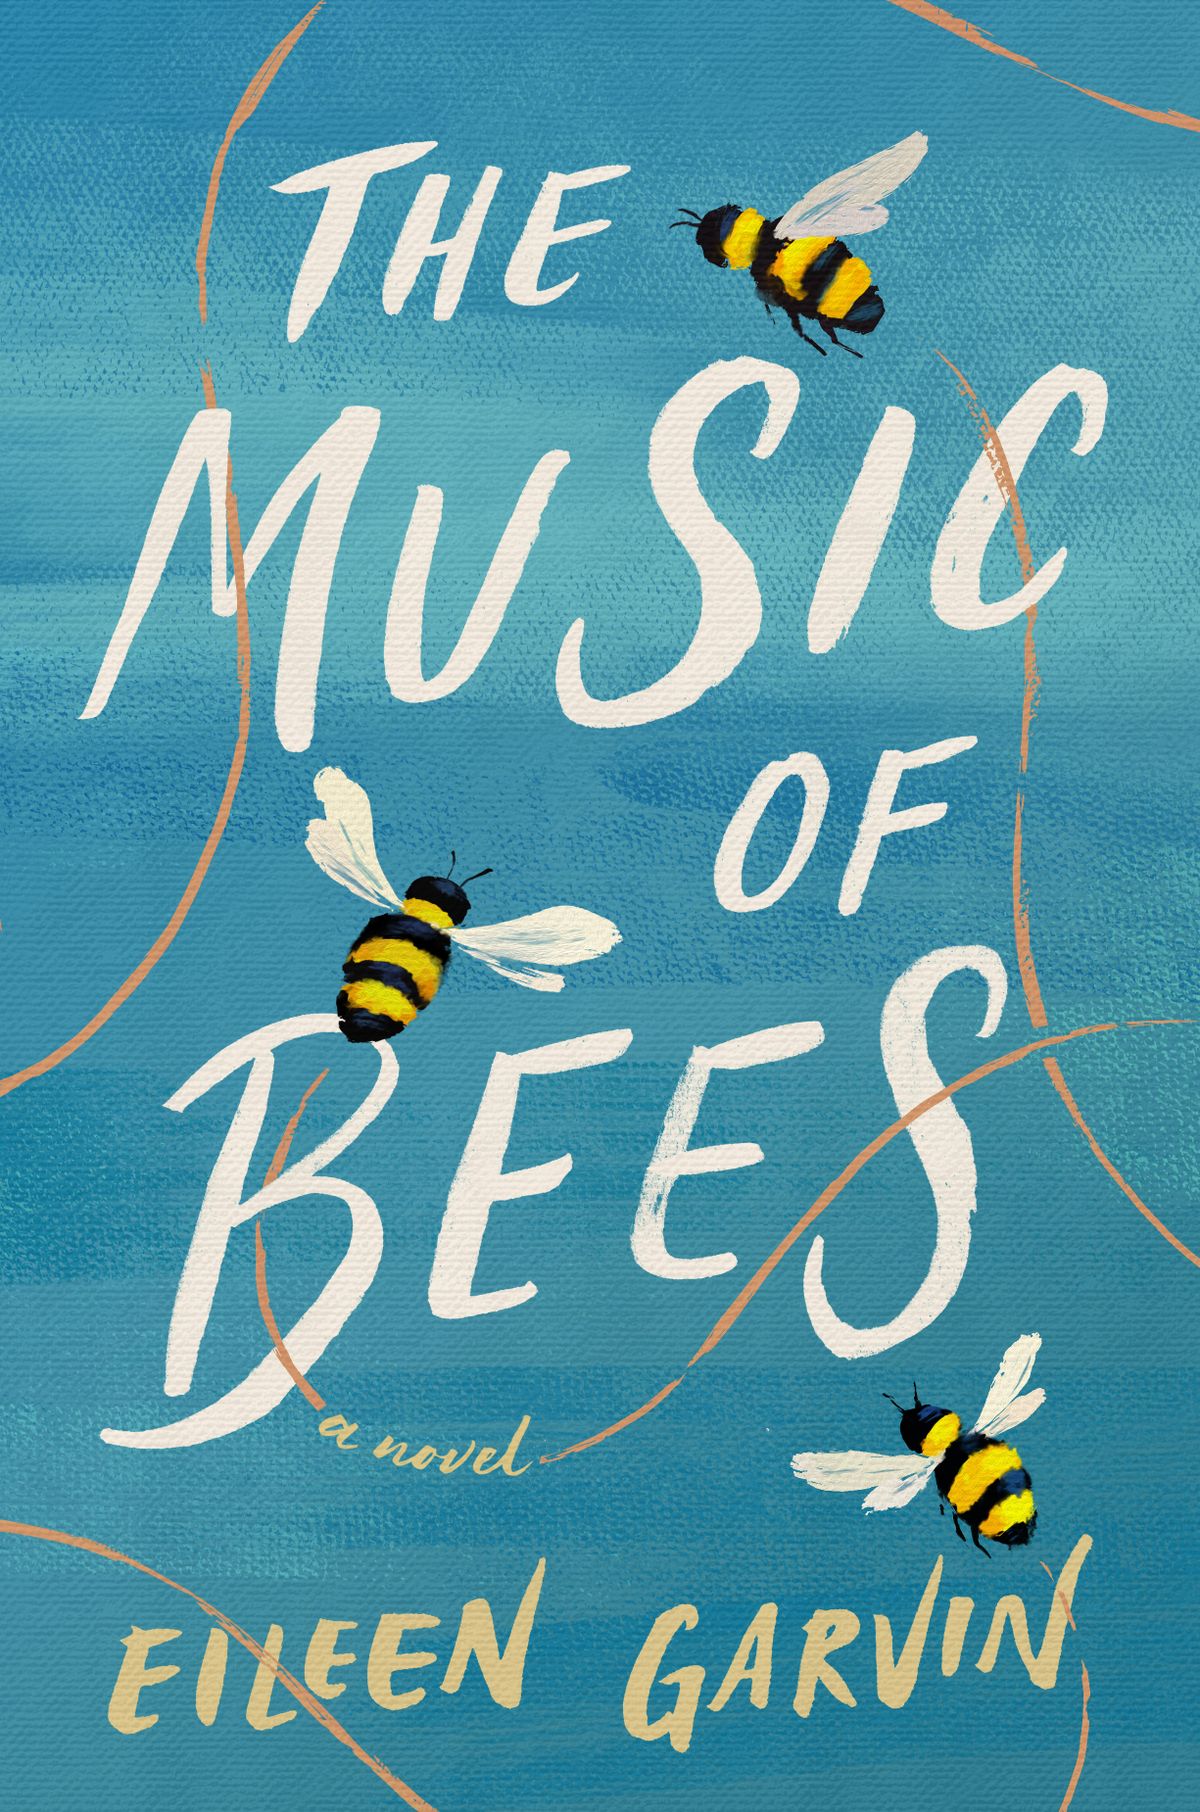 “The Music of Bees” by Eileen Garvin  (Courtesy)